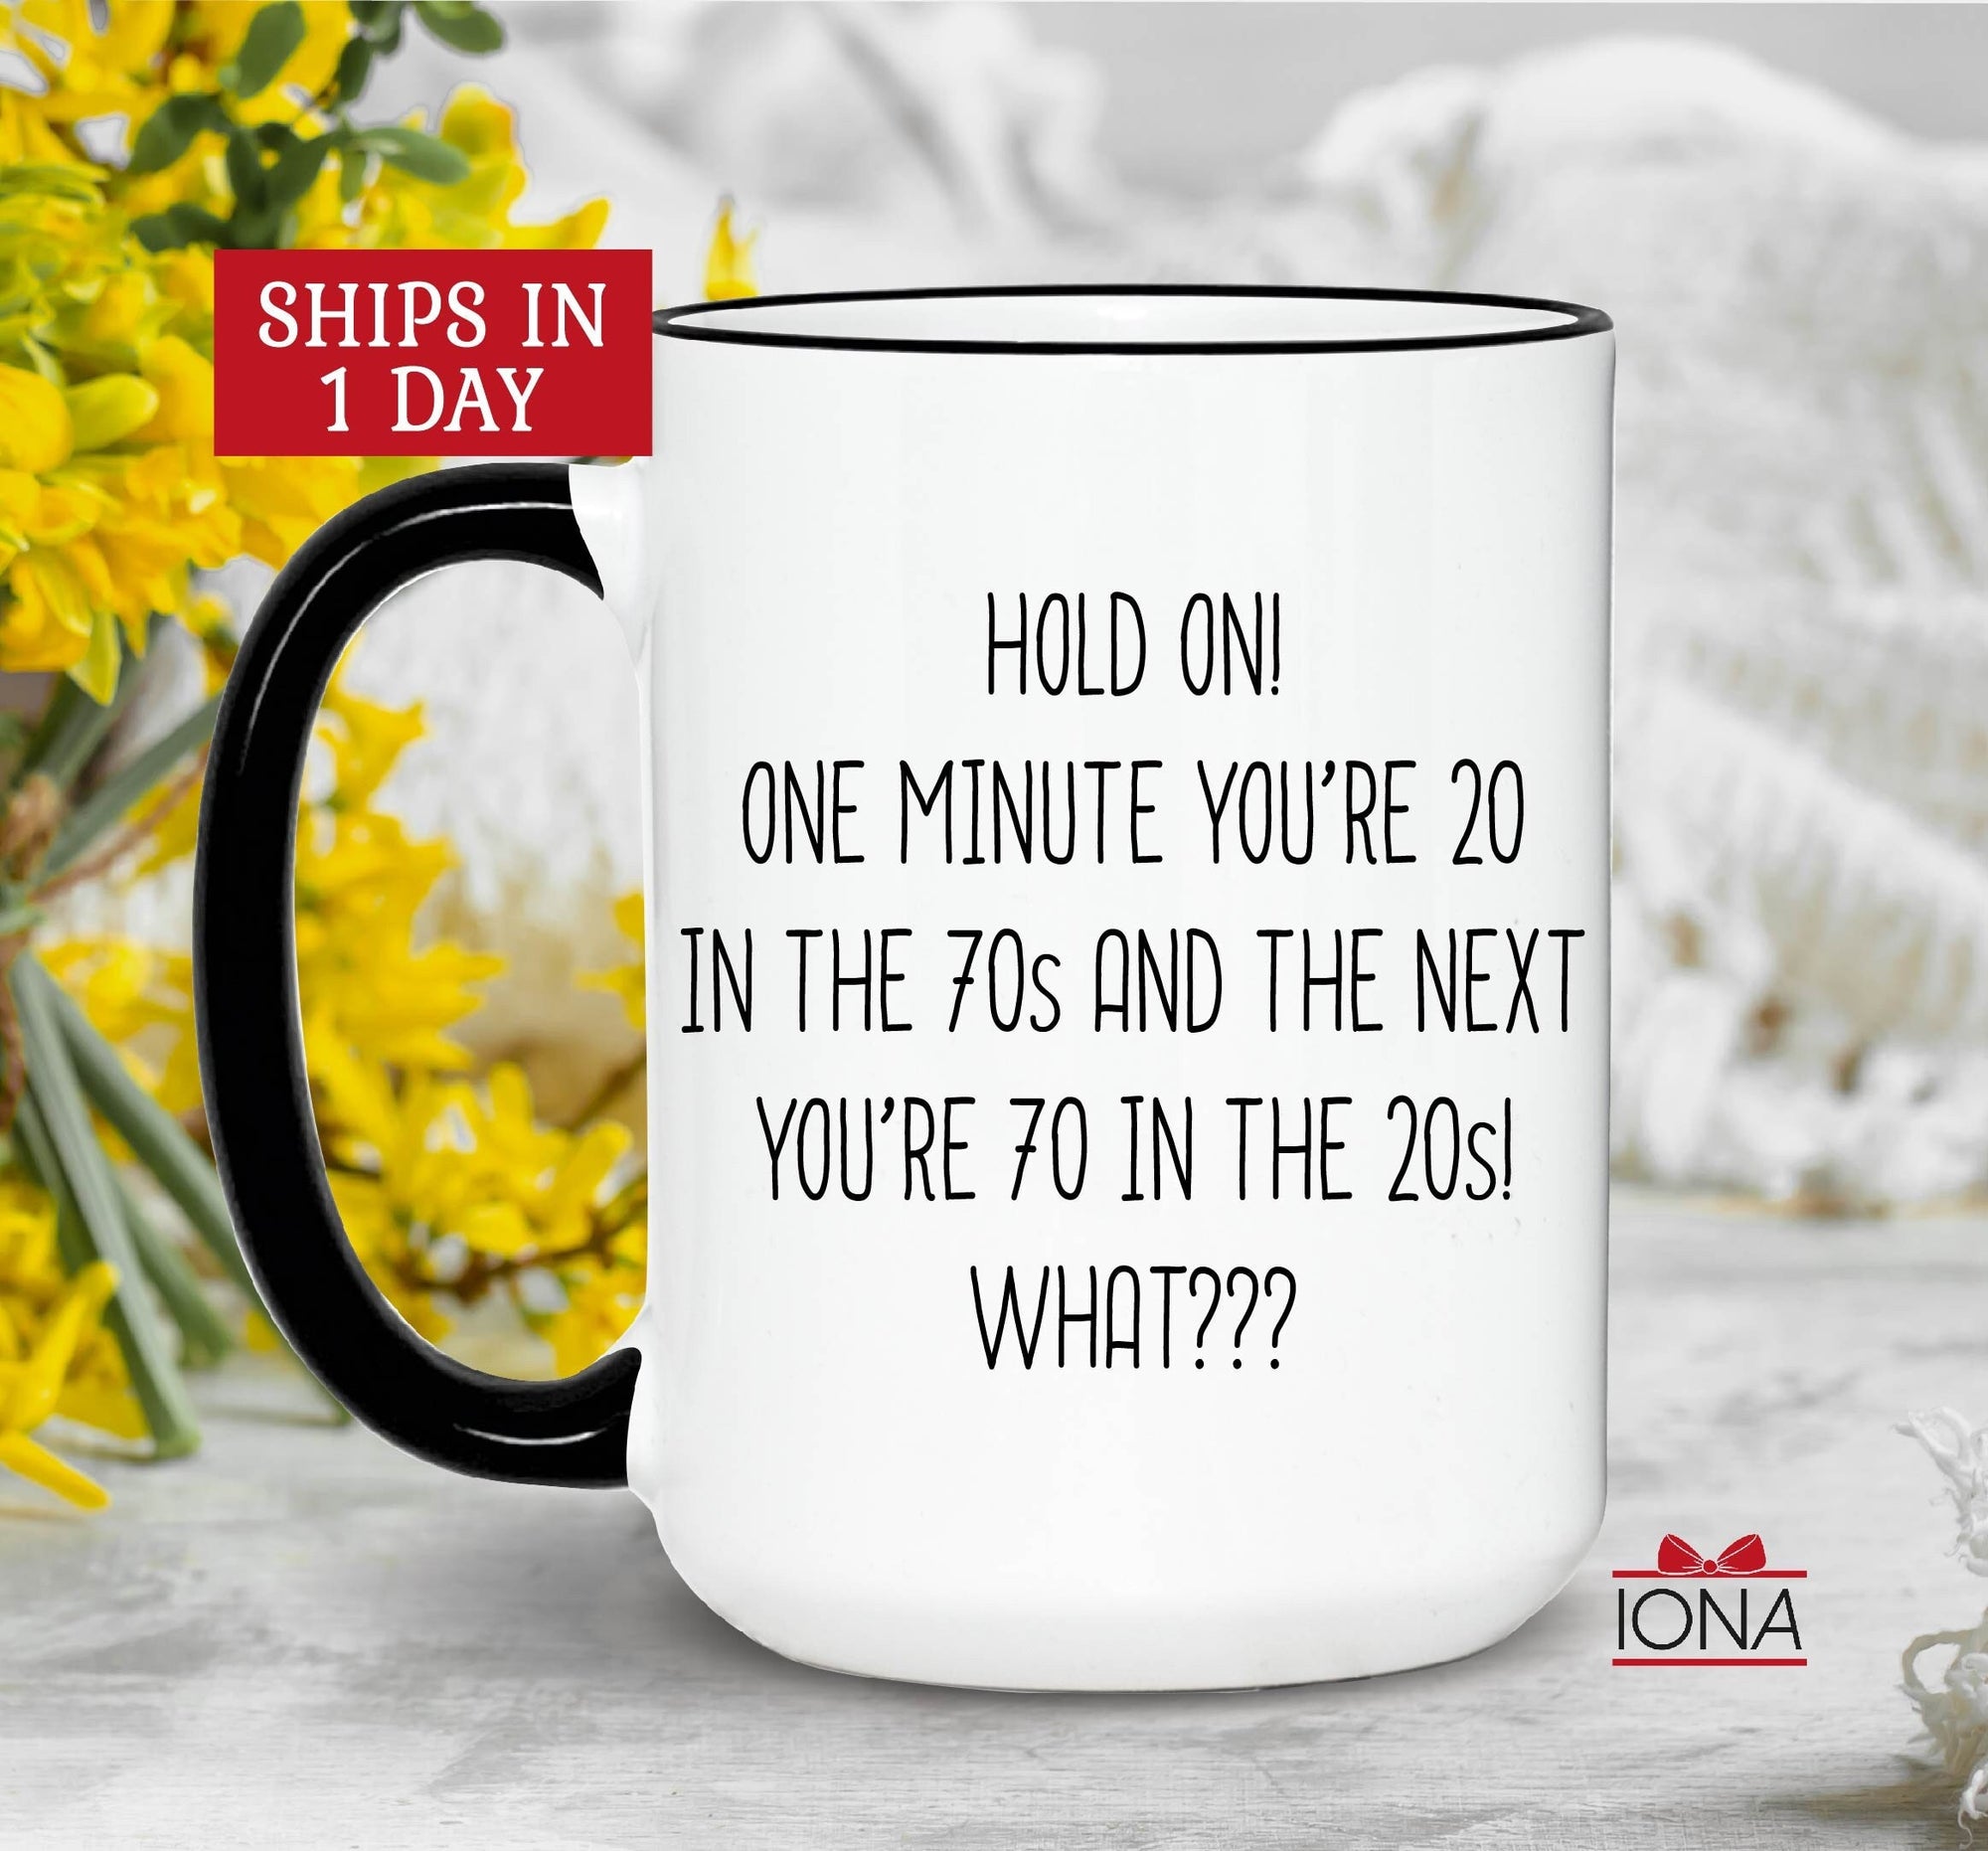 Funny 70th Birthday Gift, Grandma Grandpa Coffee Mug, Unique 1940s Milestone Gift, Aged to Perfection Turning 70, Christmas Present Idea 70 and Still Brewing: Vintage Style Ceramic Coffee Mug - Aged to Perfection - Cheers to 70 Years of Awesomeness